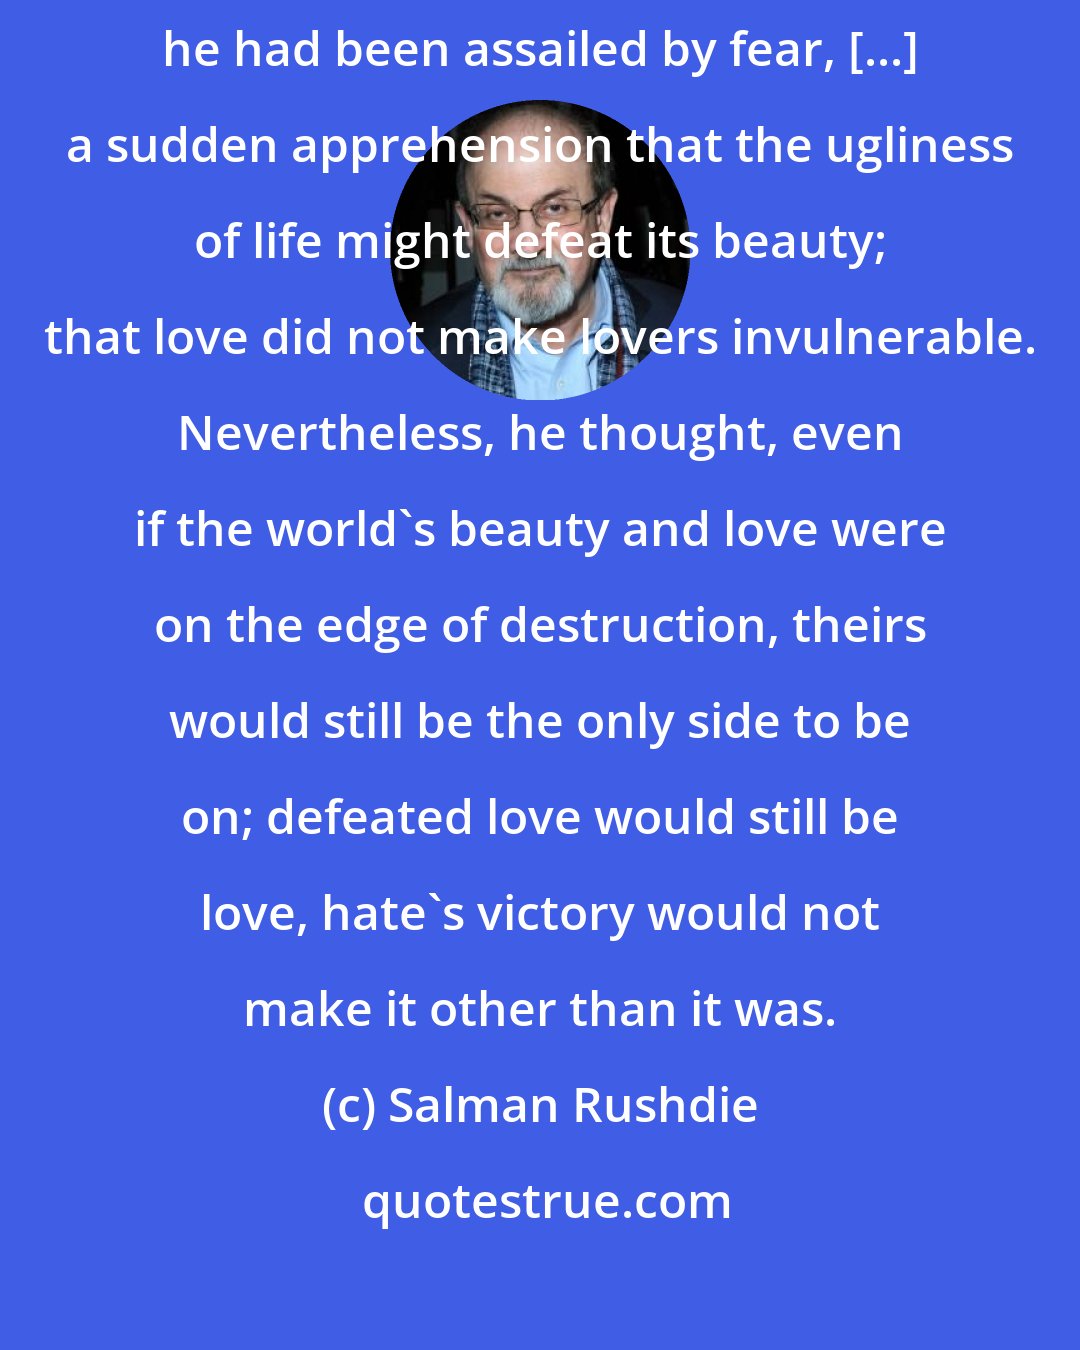 Salman Rushdie: Abraham Zogoiby covered his face that night in August 1939 because he had been assailed by fear, [...] a sudden apprehension that the ugliness of life might defeat its beauty; that love did not make lovers invulnerable. Nevertheless, he thought, even if the world's beauty and love were on the edge of destruction, theirs would still be the only side to be on; defeated love would still be love, hate's victory would not make it other than it was.